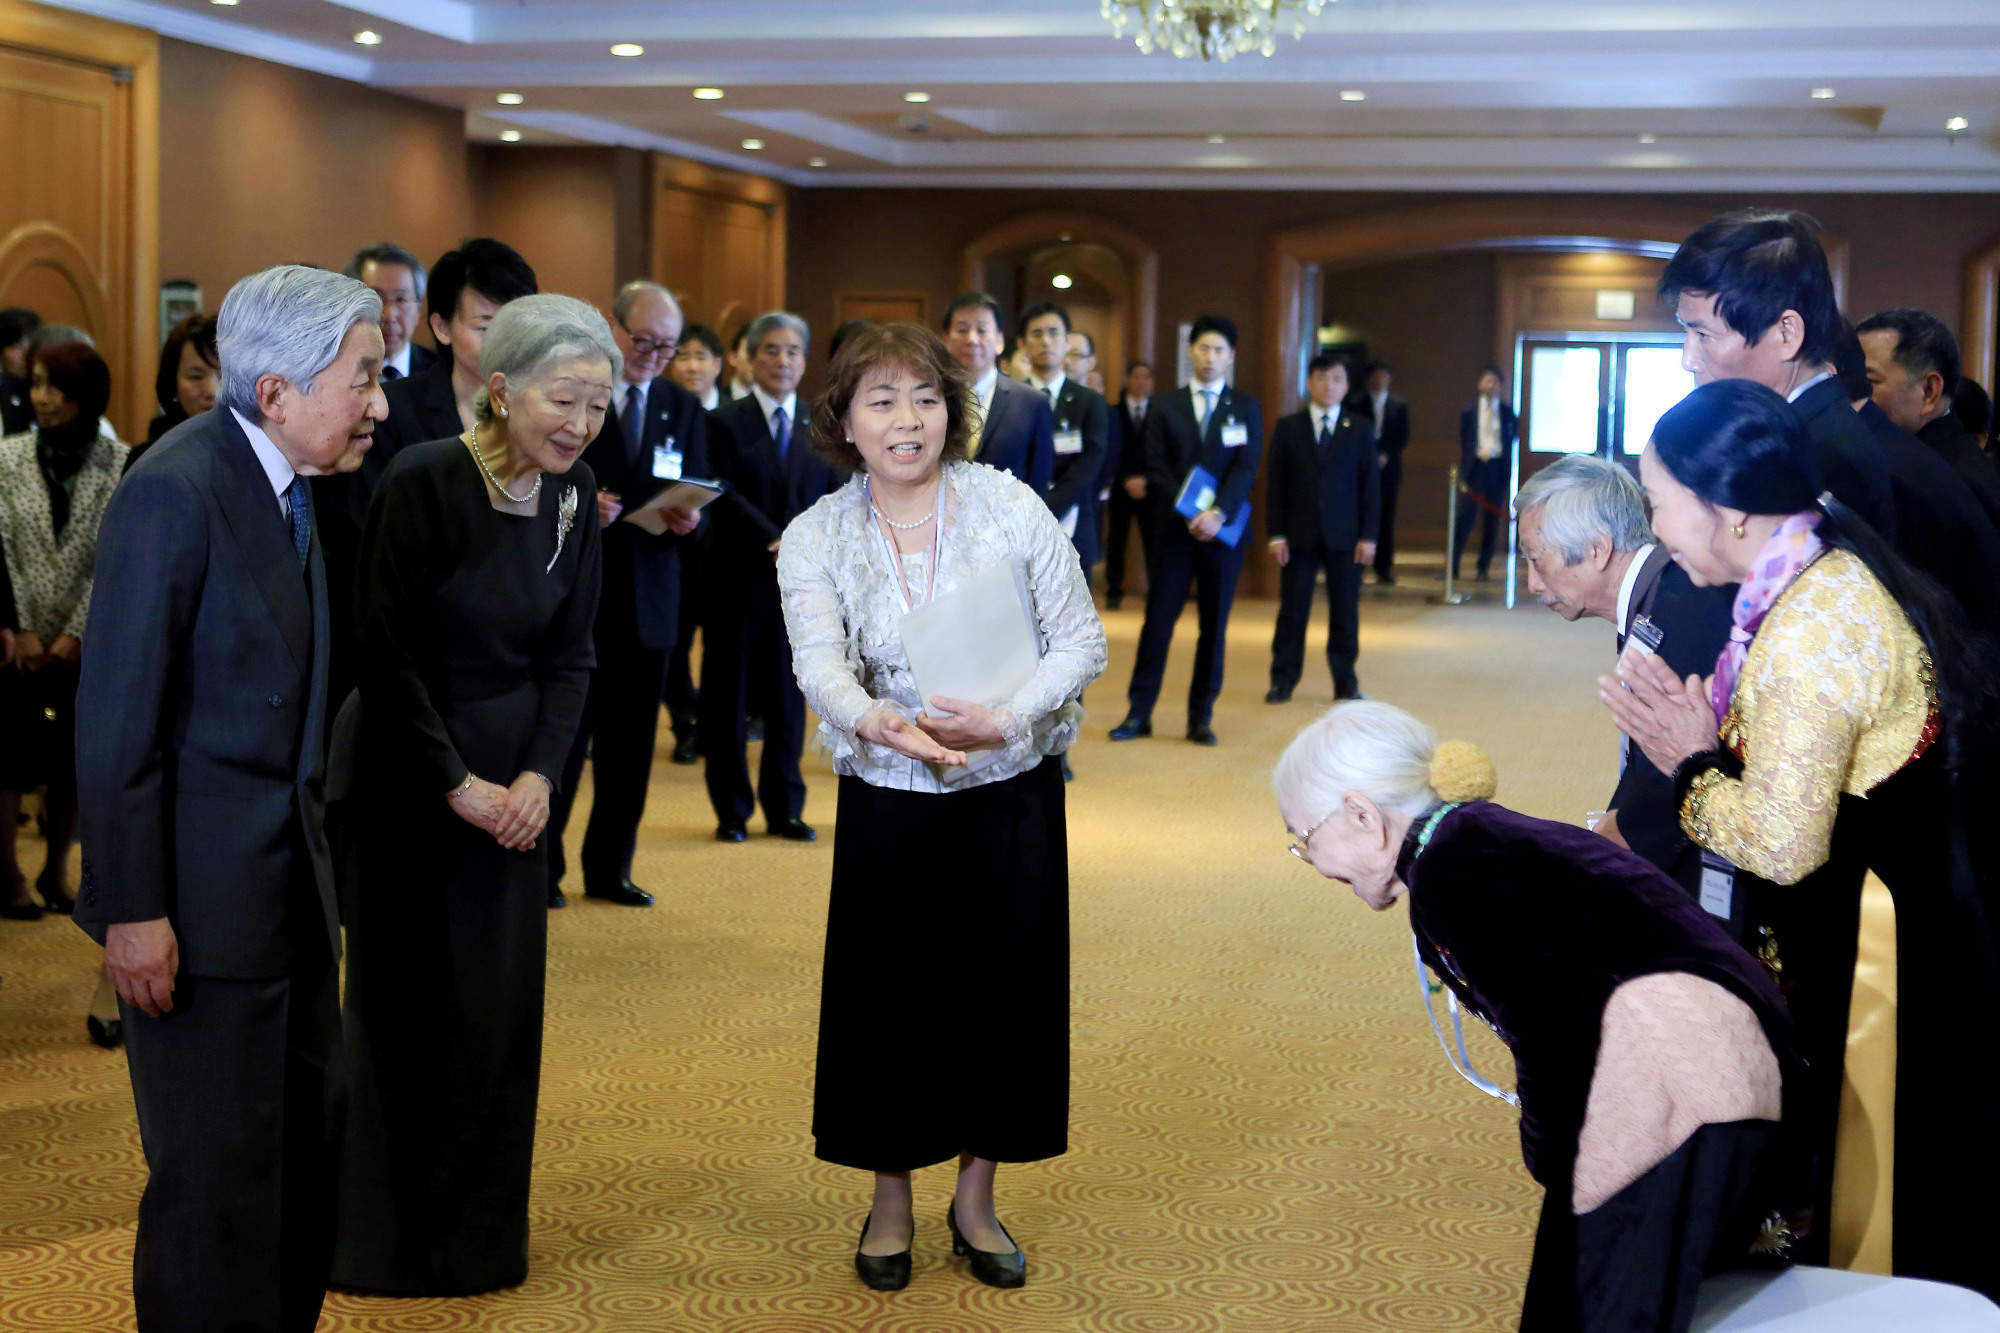 Nguyen Thi Xuan, 93, greets Emperor Akihito and Empress Michiko at a hotel in Hanoi on Thursday during an event held for the wives and offspring of Japanese war veterans who stayed in Vietnam after World War II. | AFP-JIJI